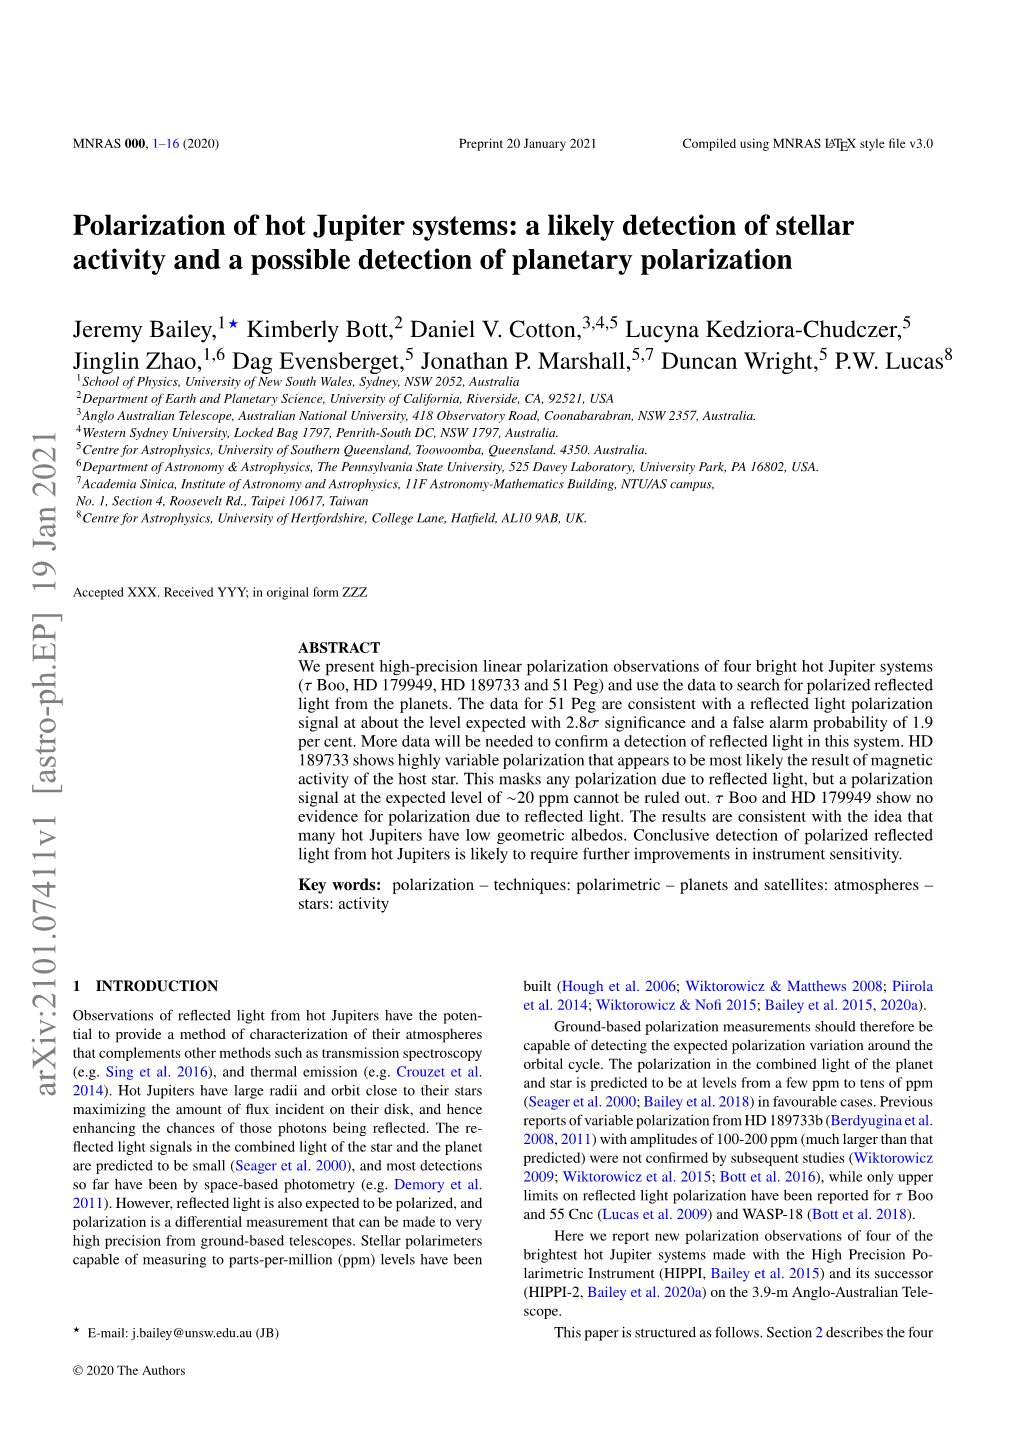 Polarization of Hot Jupiter Systems: a Likely Detection of Stellar Activity and a Possible Detection of Planetary Polarization